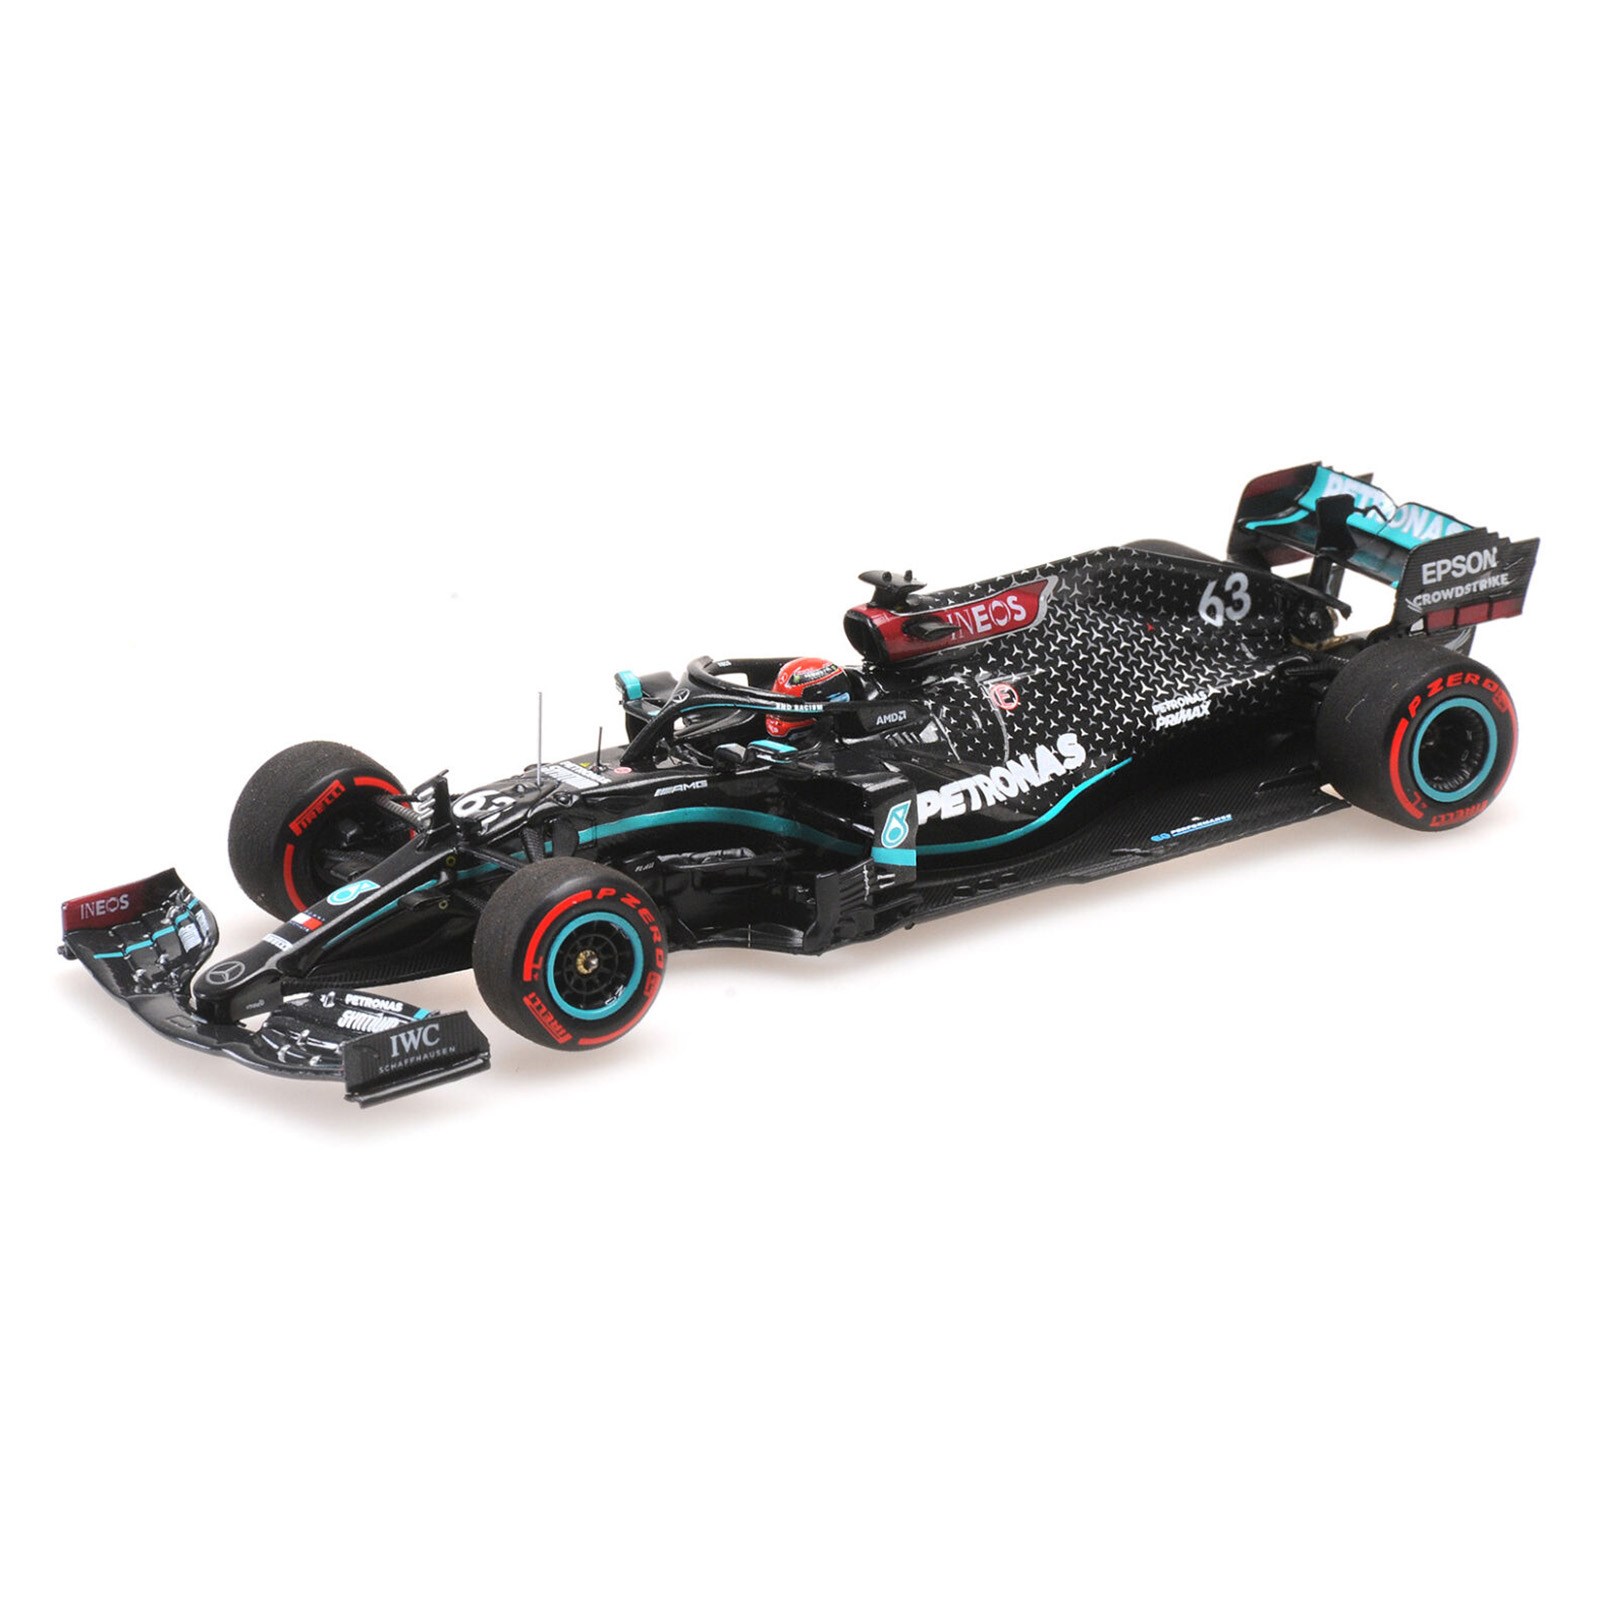 Minichamps Mercedes-AMG F1 W11 #63 Sakhir GP 2020 George Russell 1/43 Scale